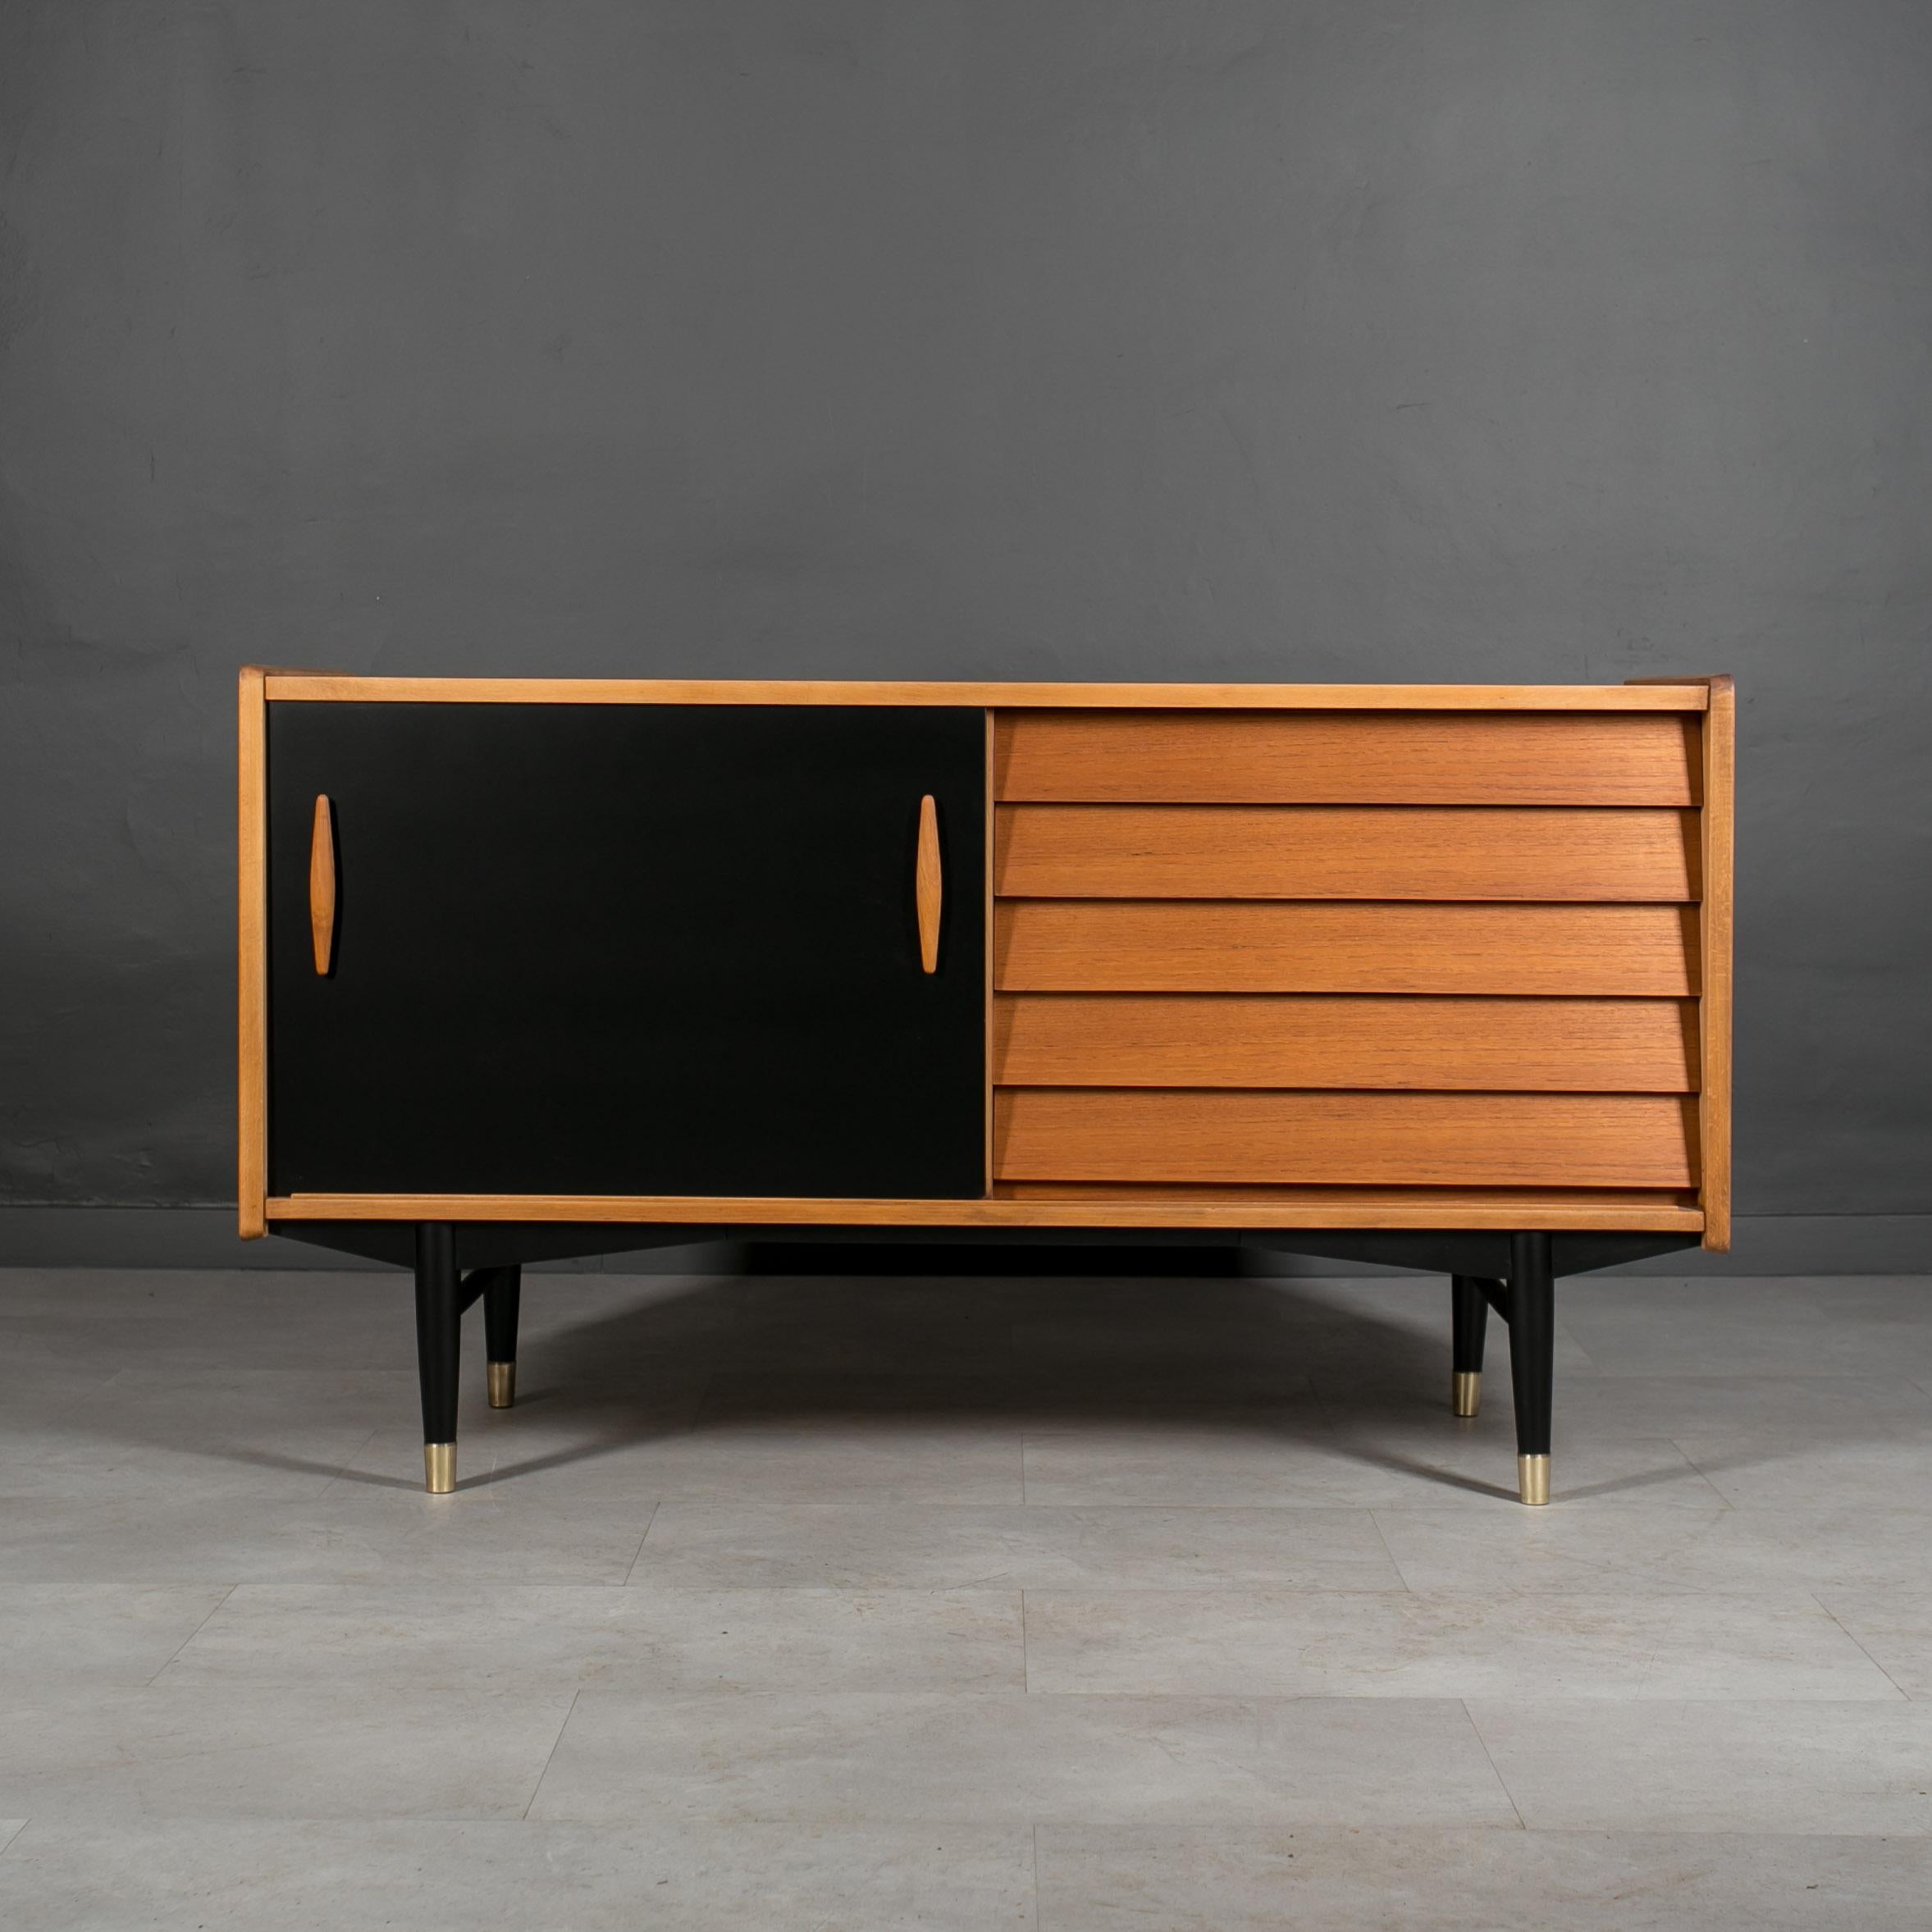 Discover the rare elegance of this distinctive teak wood sideboard, a unique design by Nils Jonsson exemplifying the timeless allure of Scandinavian Modern style. Crafted with precision and attention to detail, this remarkable piece features black